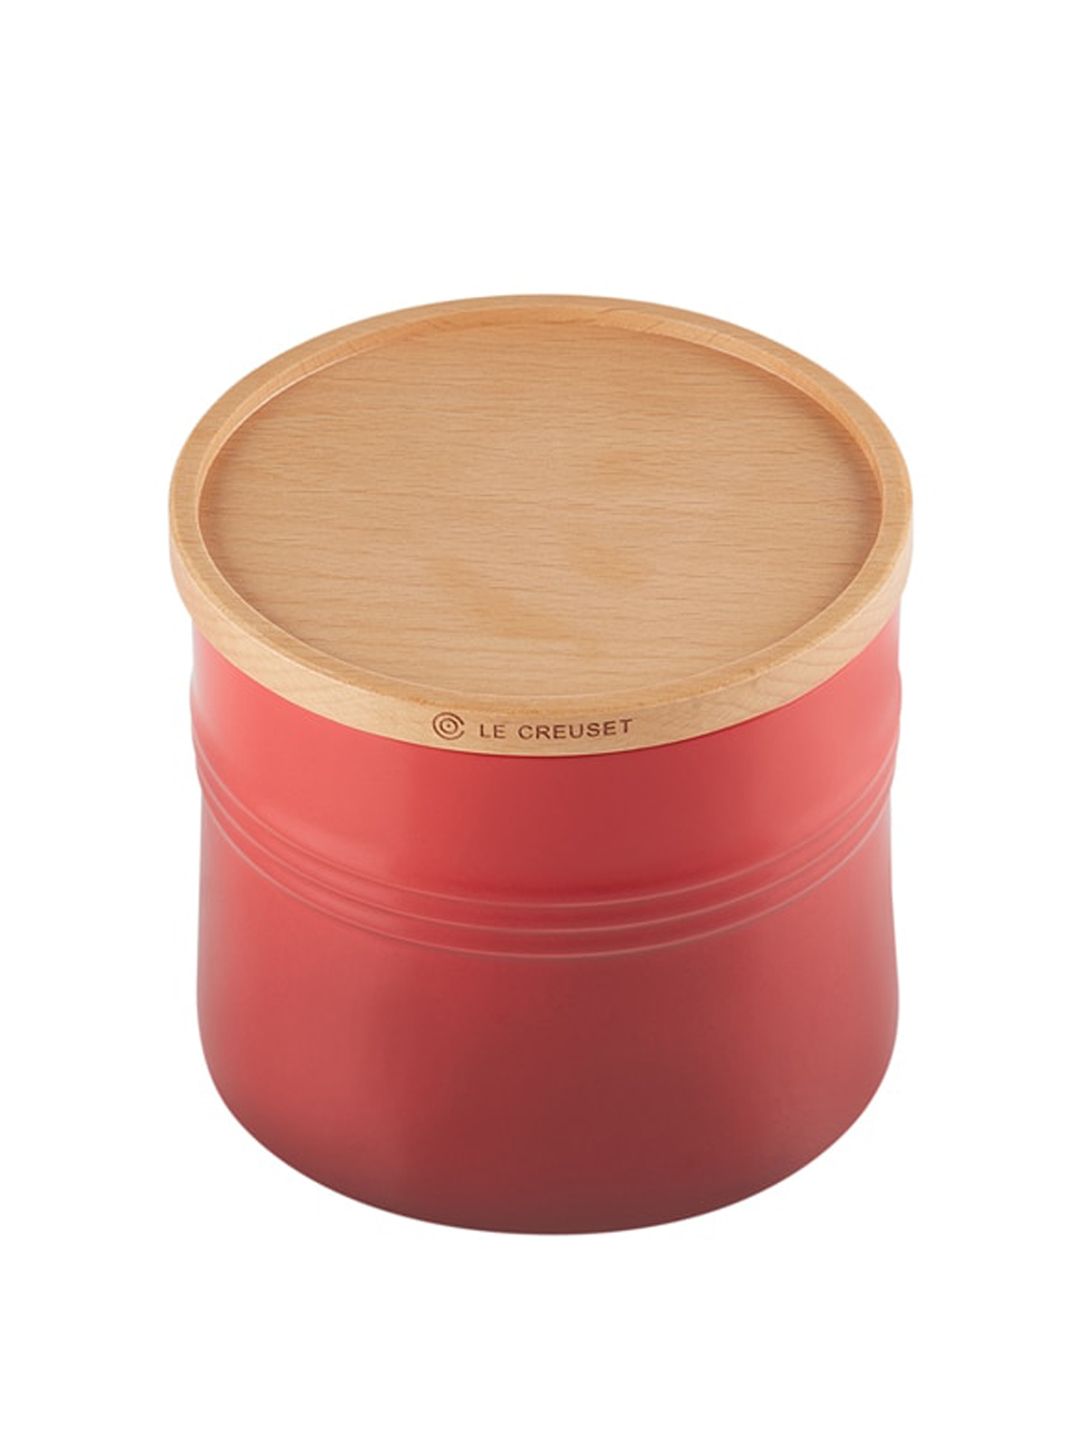 LE CREUSET Adults Red Large Storage Jar with Wood Lid Price in India